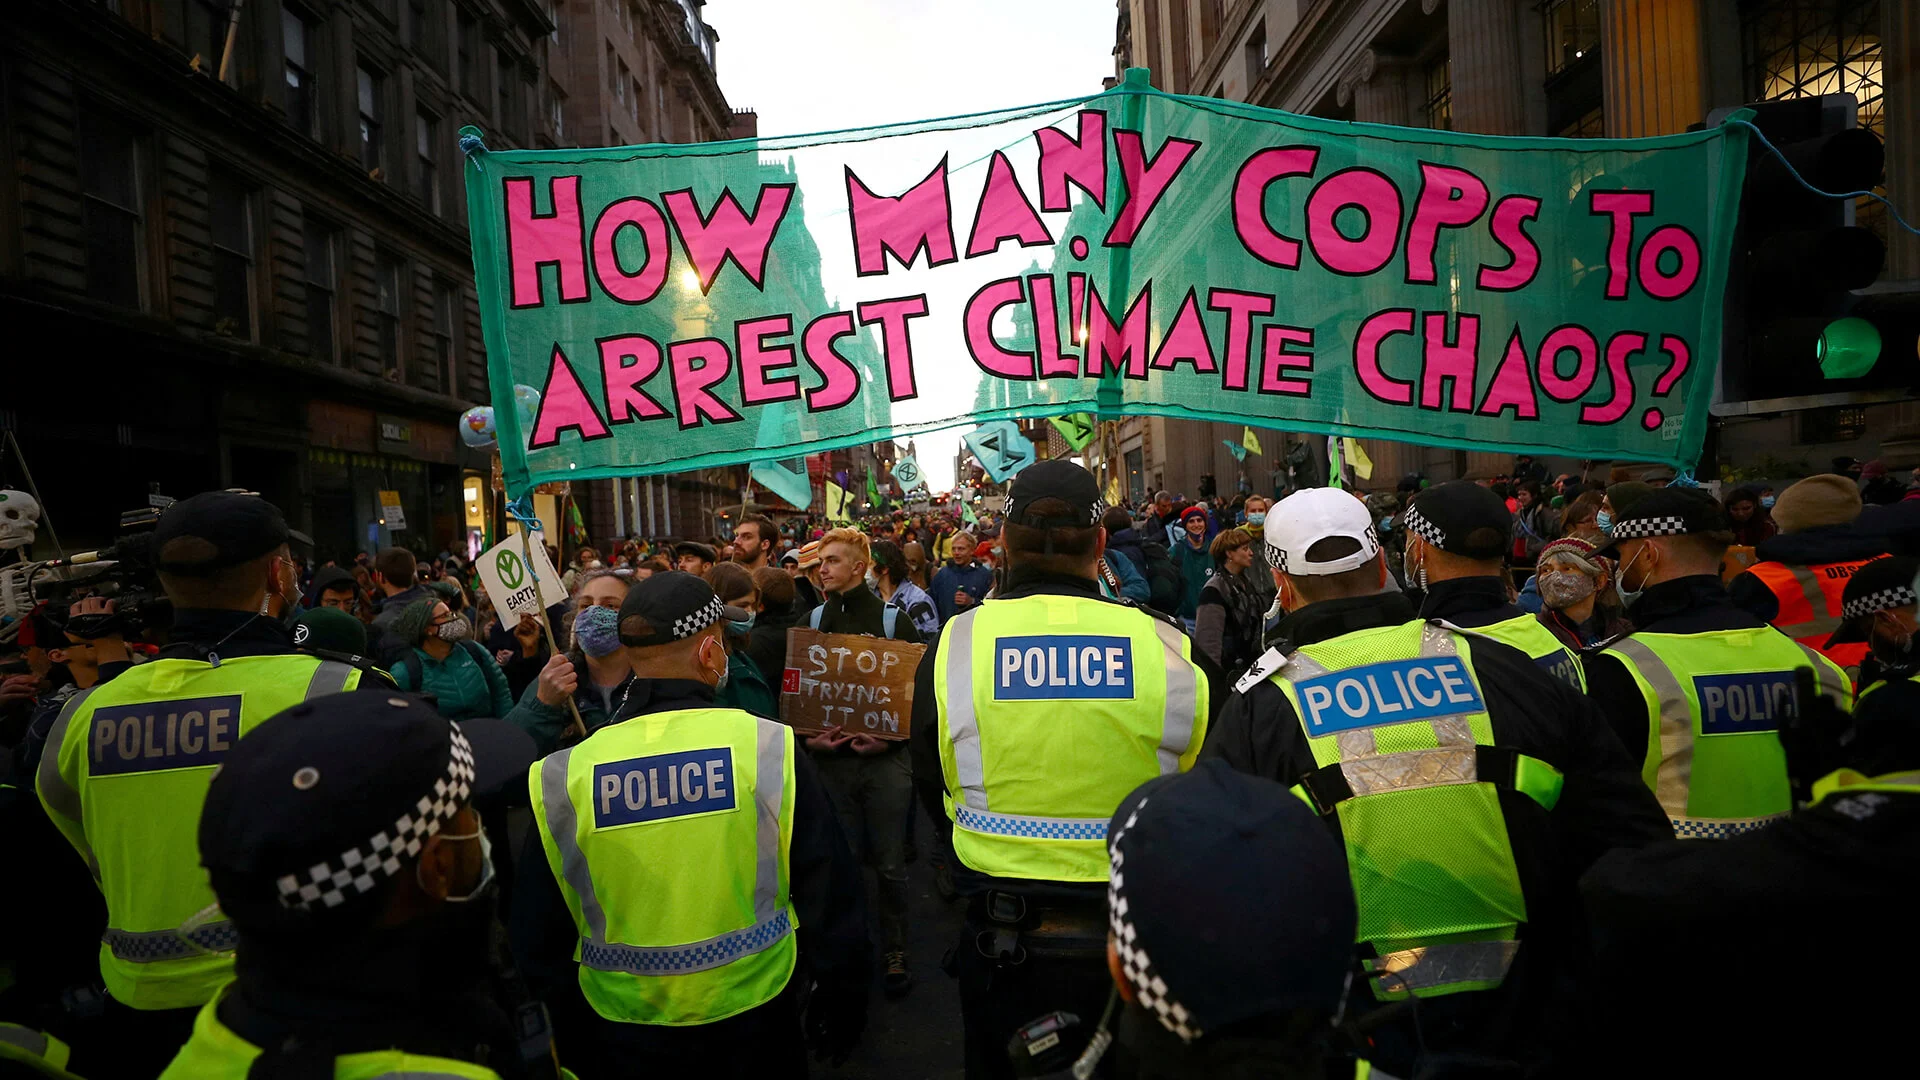 Extinction Rebellion activists stand in front of police officers as they protest during the UN Climate Change Conference (COP26) in Glasgow, Scotland, Britain, November 3, 2021 REUTERS/Hannah McKay/File Photo